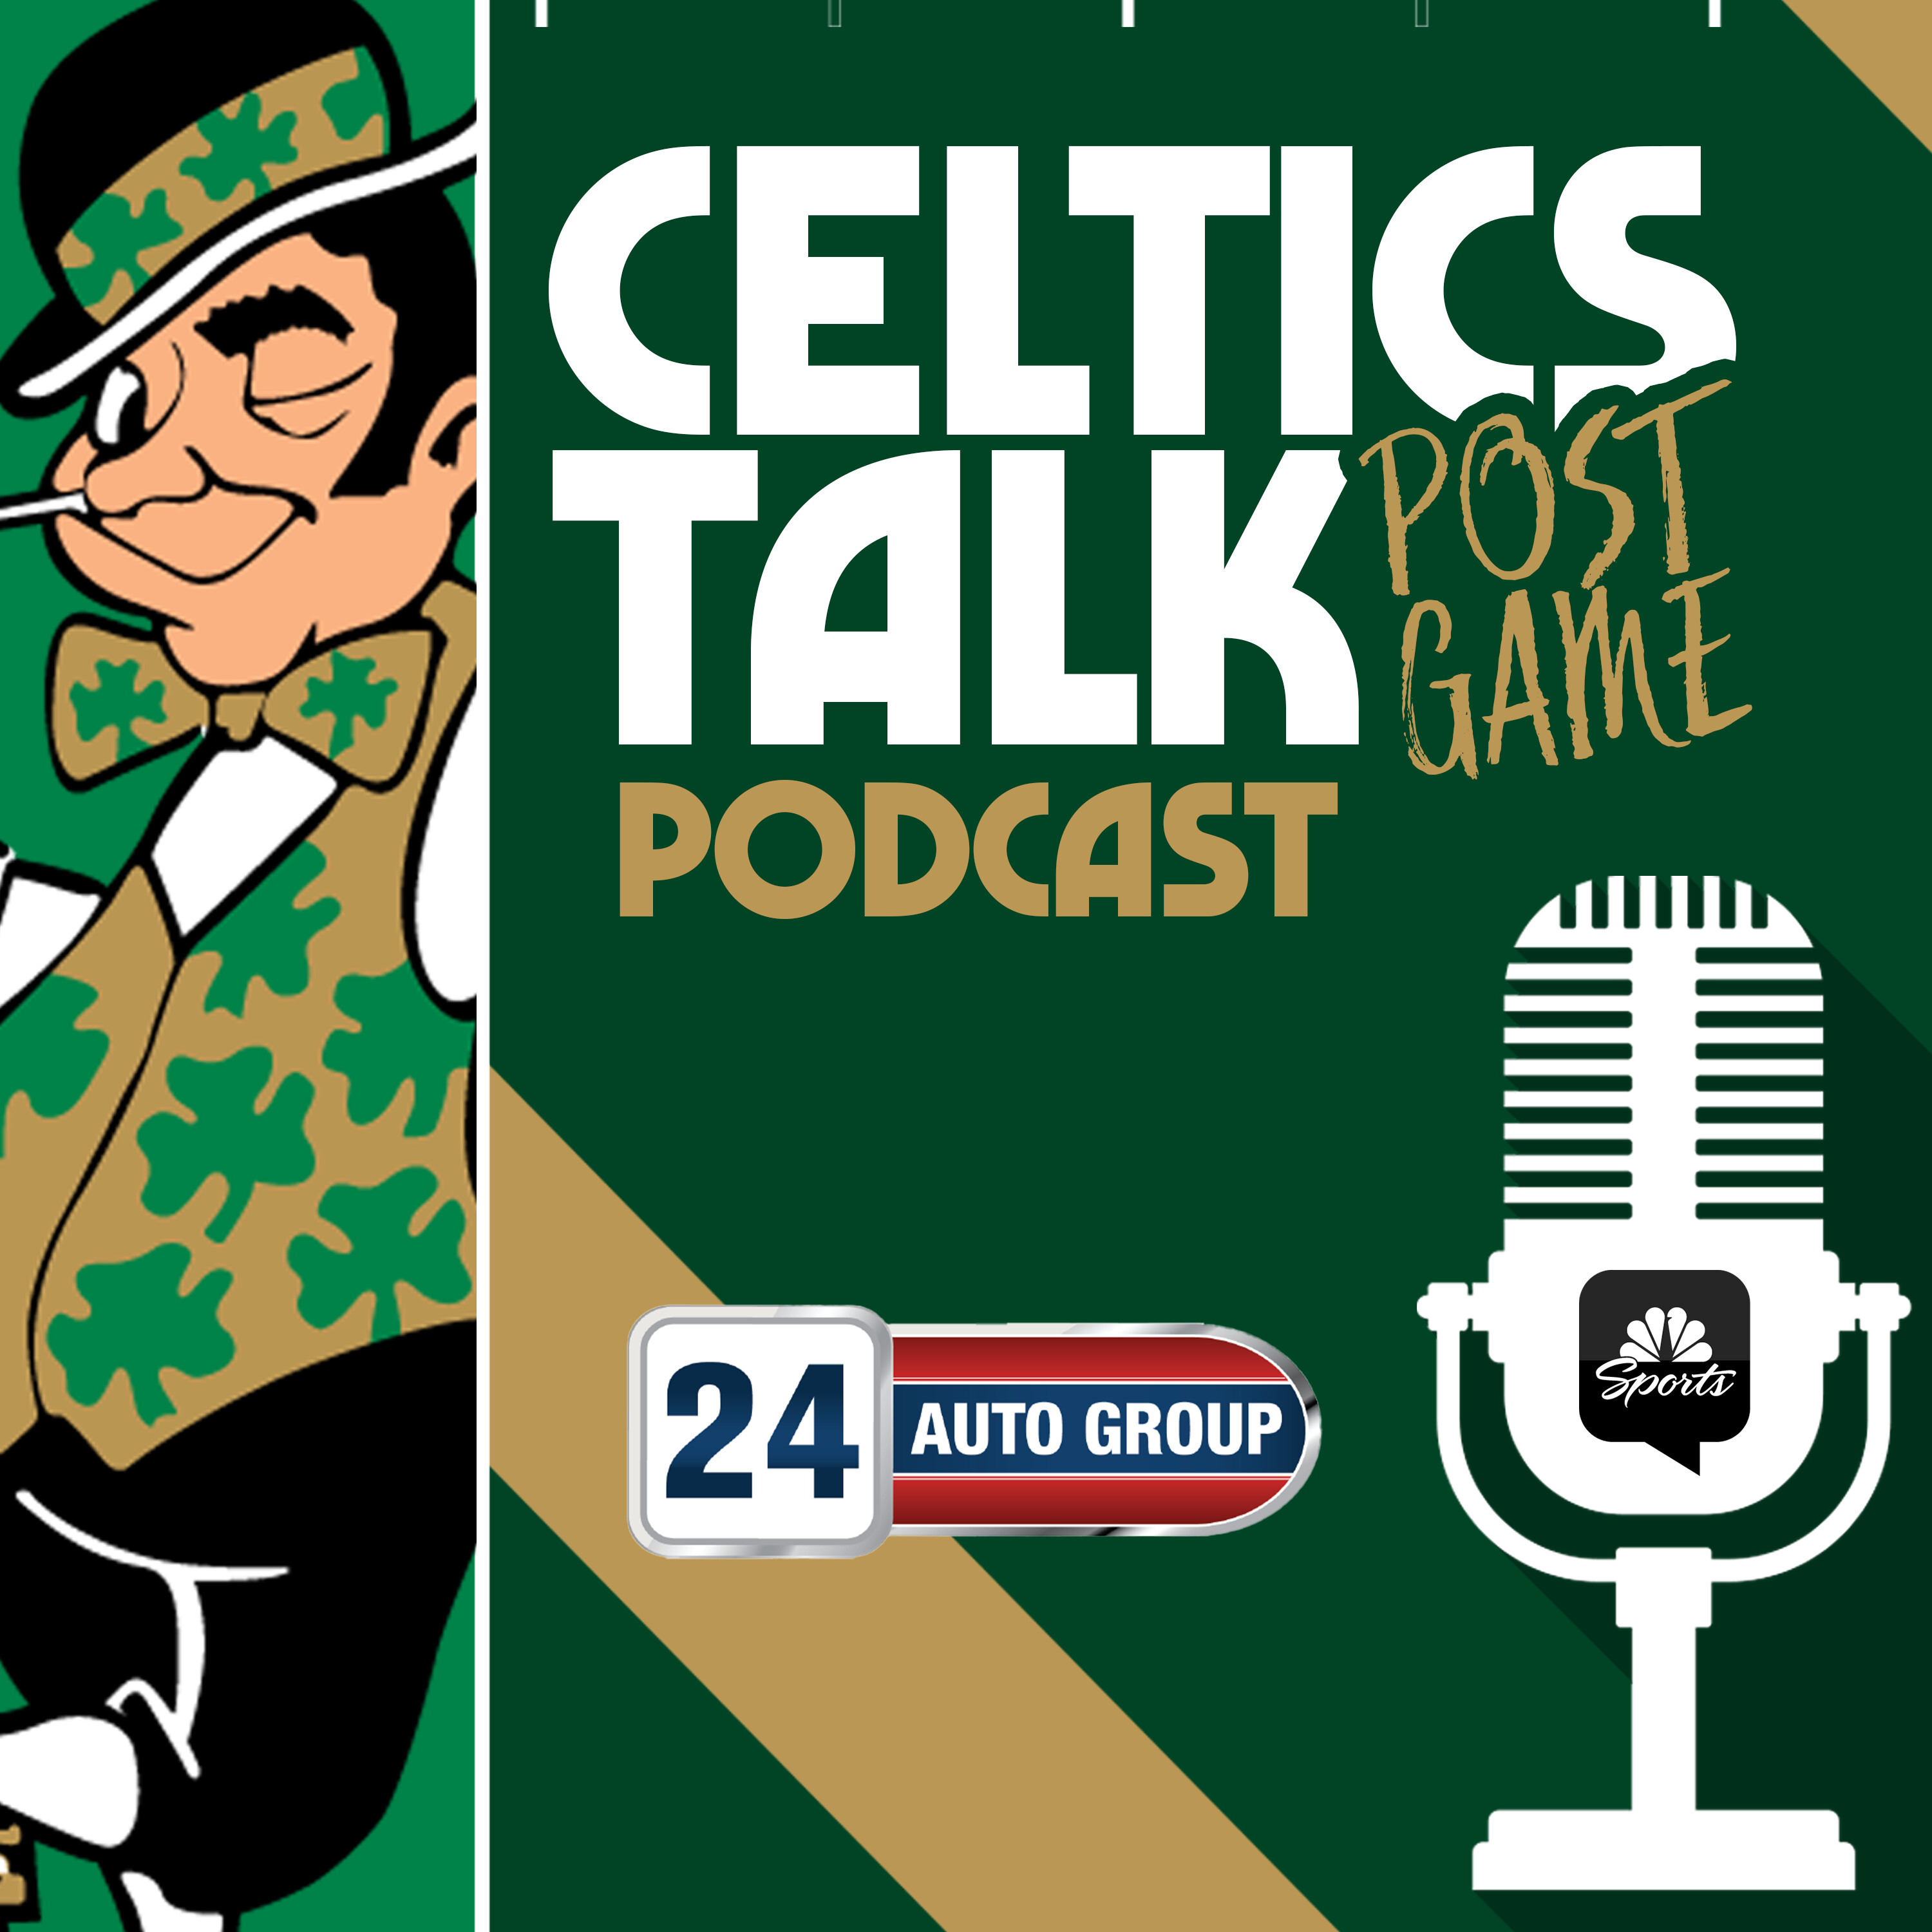 POSTGAME POD: Celtics gut out the win over shorthanded Spurs, who have no answer for ROB WILLIAMS